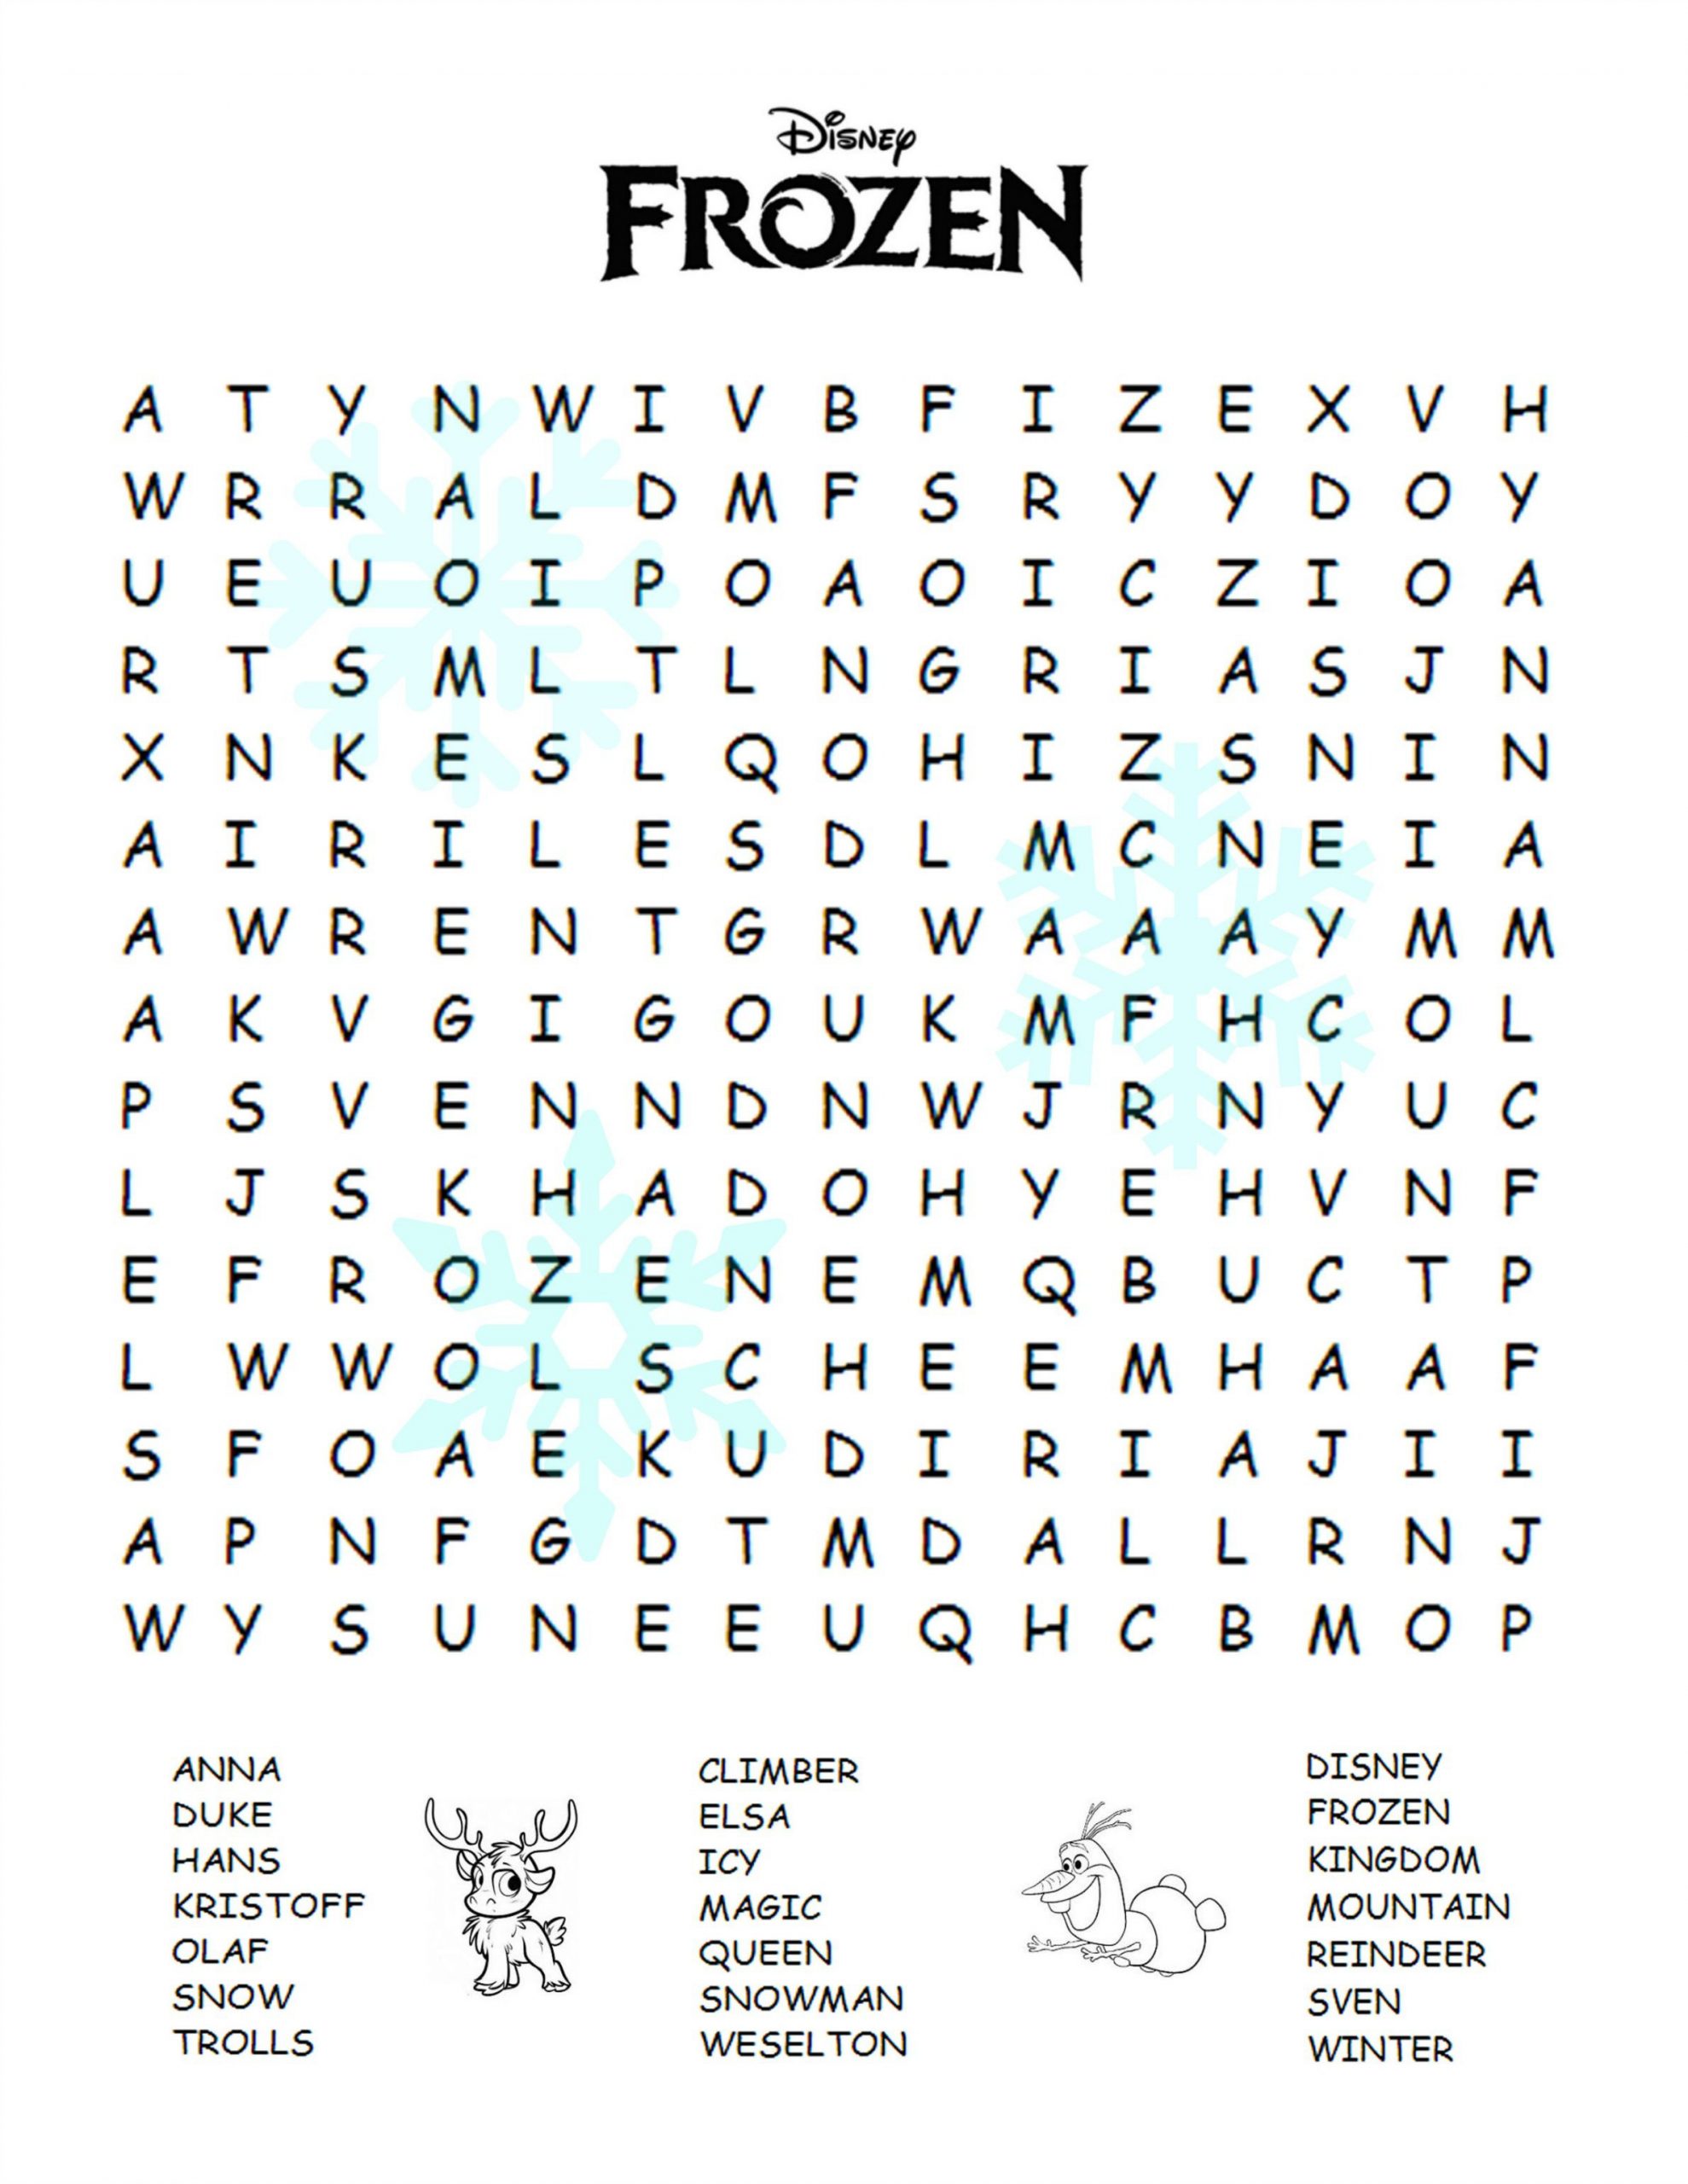 Frozen Fun Activities For The Kids! Printable Wordsearch And